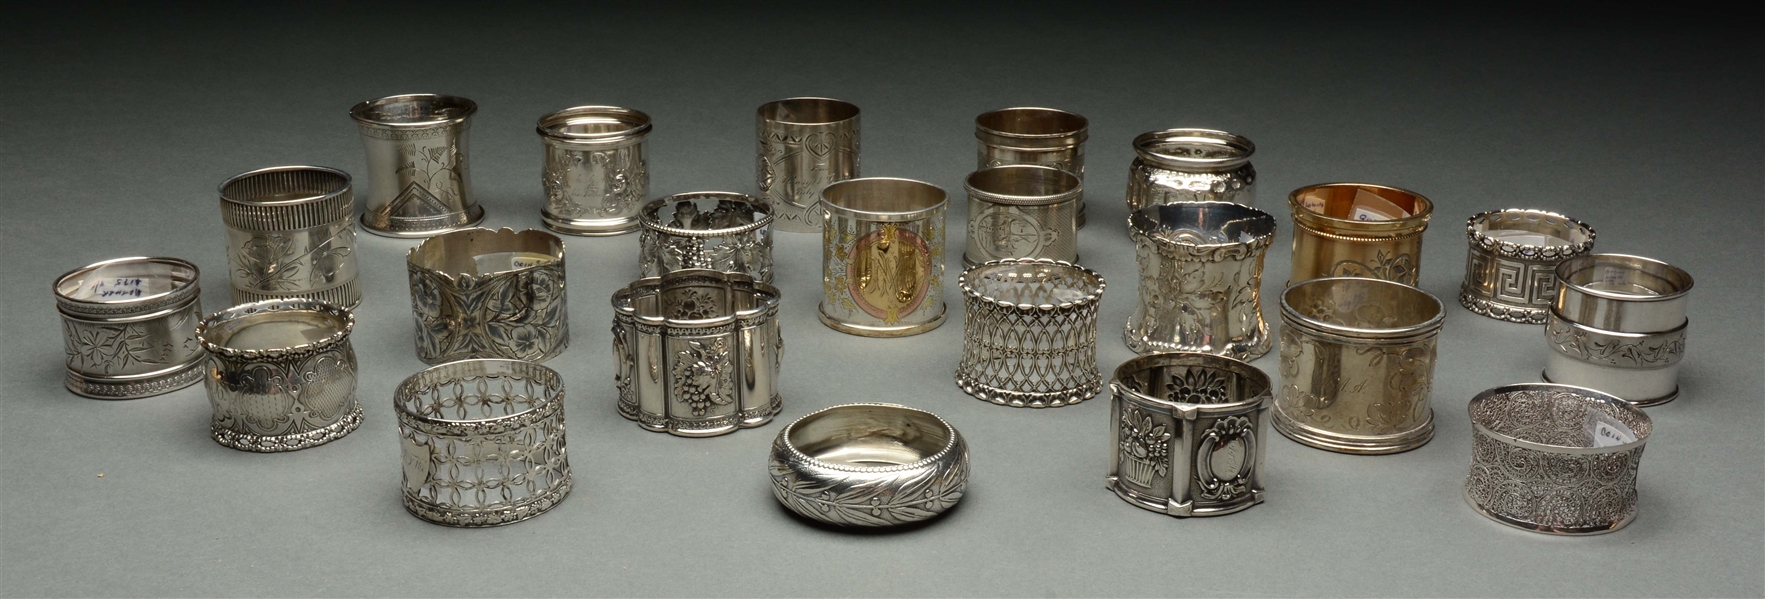 LOT OF 23: COIN SILVER NAPKIN RINGS. 